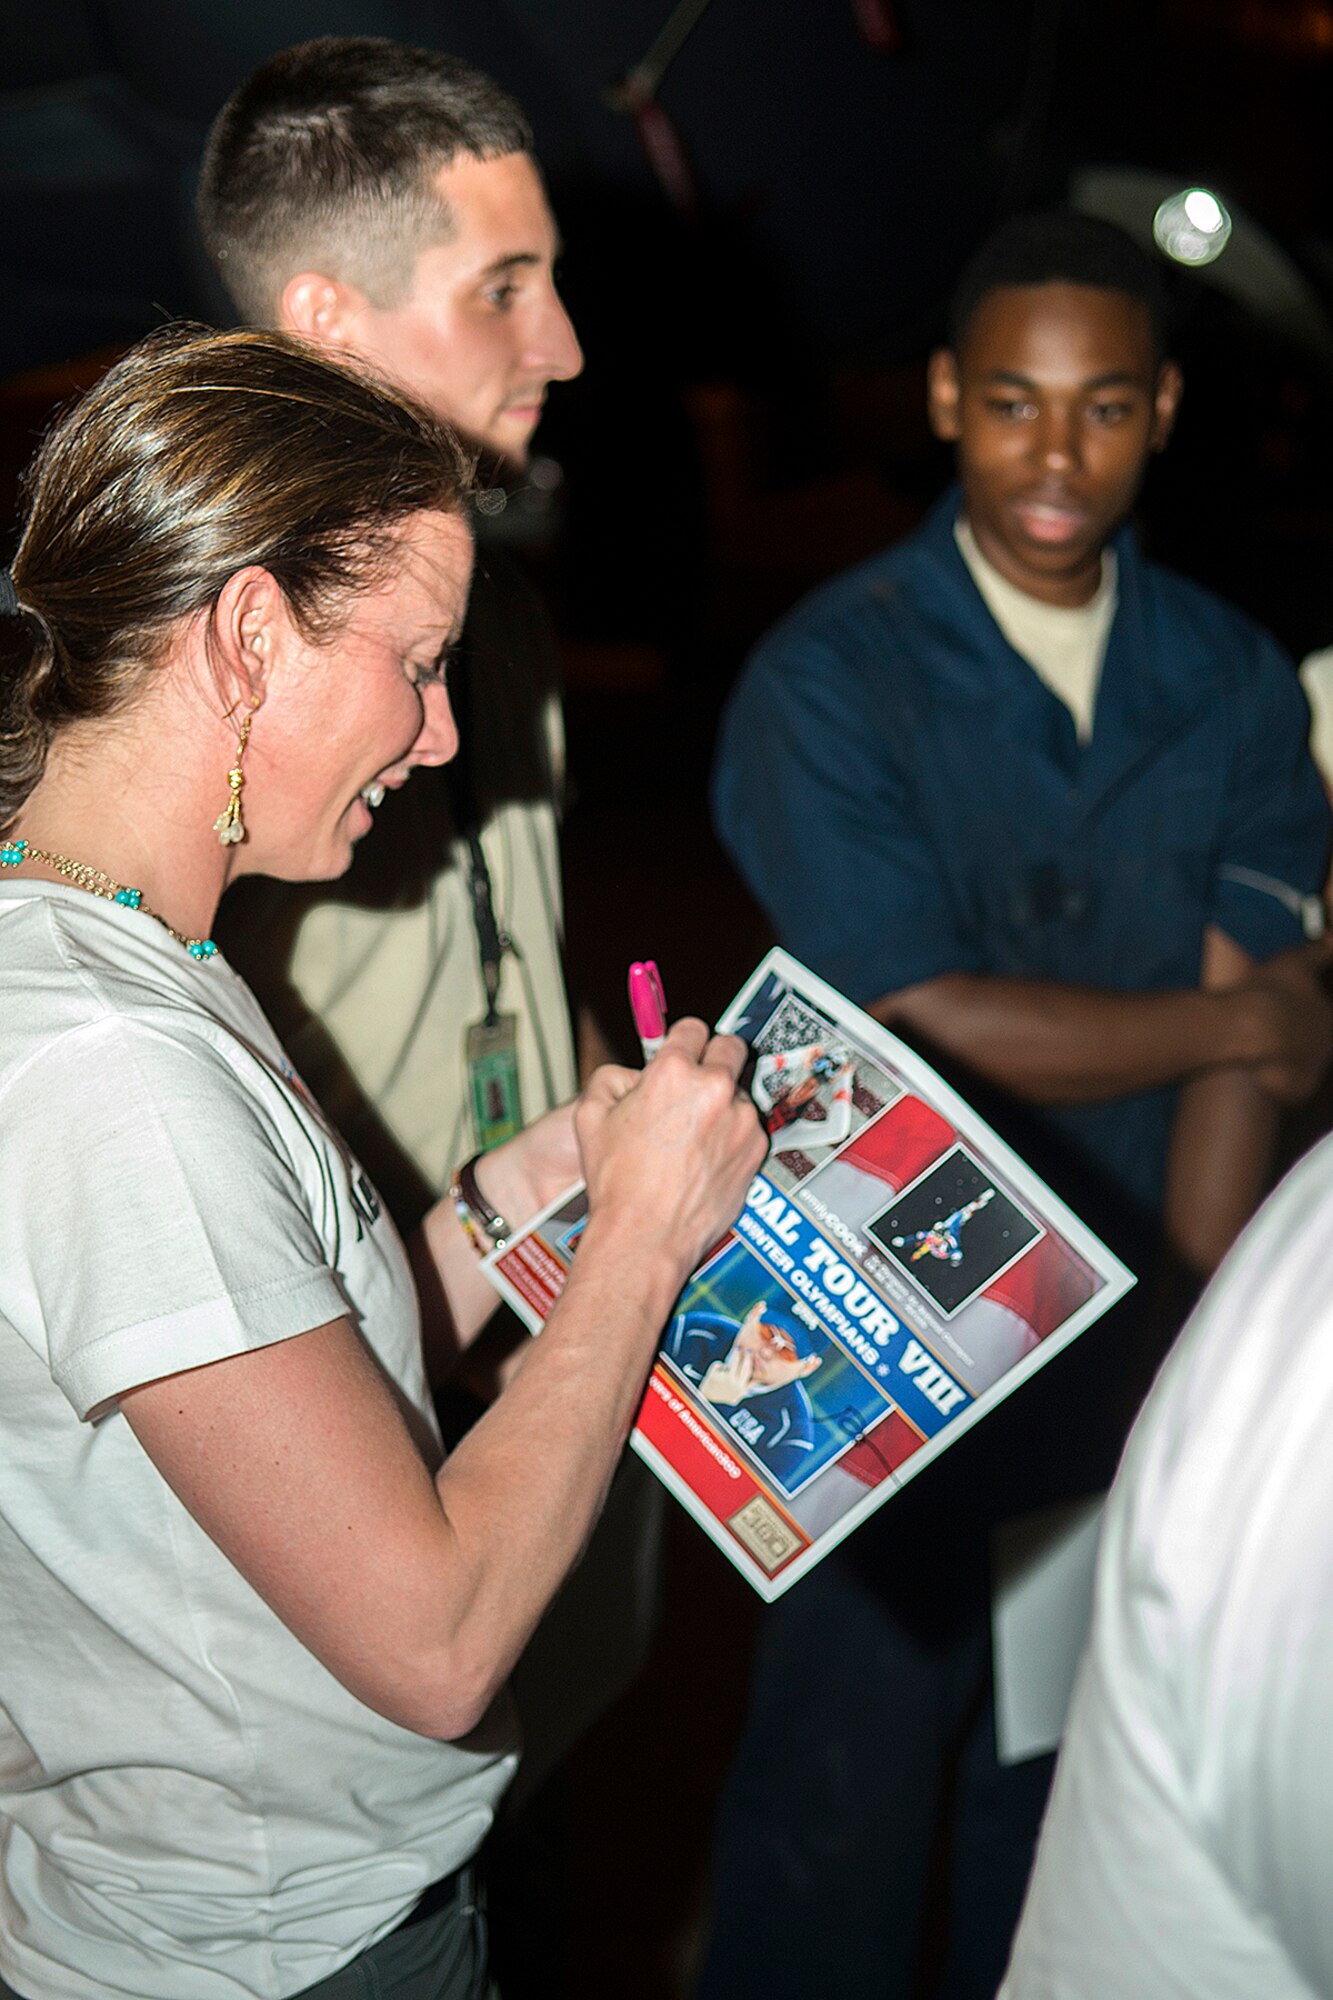 Emily Cook signs autographs after touring a 307th Bomb Wing B-52H Stratofortress, June 4, 2014, Barksdale Air Force Base, La. Cook is a 3-time Olympic U.S. Freestyle skier and joined the American300 Tours to visit military installations with the goal of increasing resiliency of the troops, their families, and the communities that they live and operate in. (U.S. Air Force photo by Master Sgt. Greg Steele/Released)